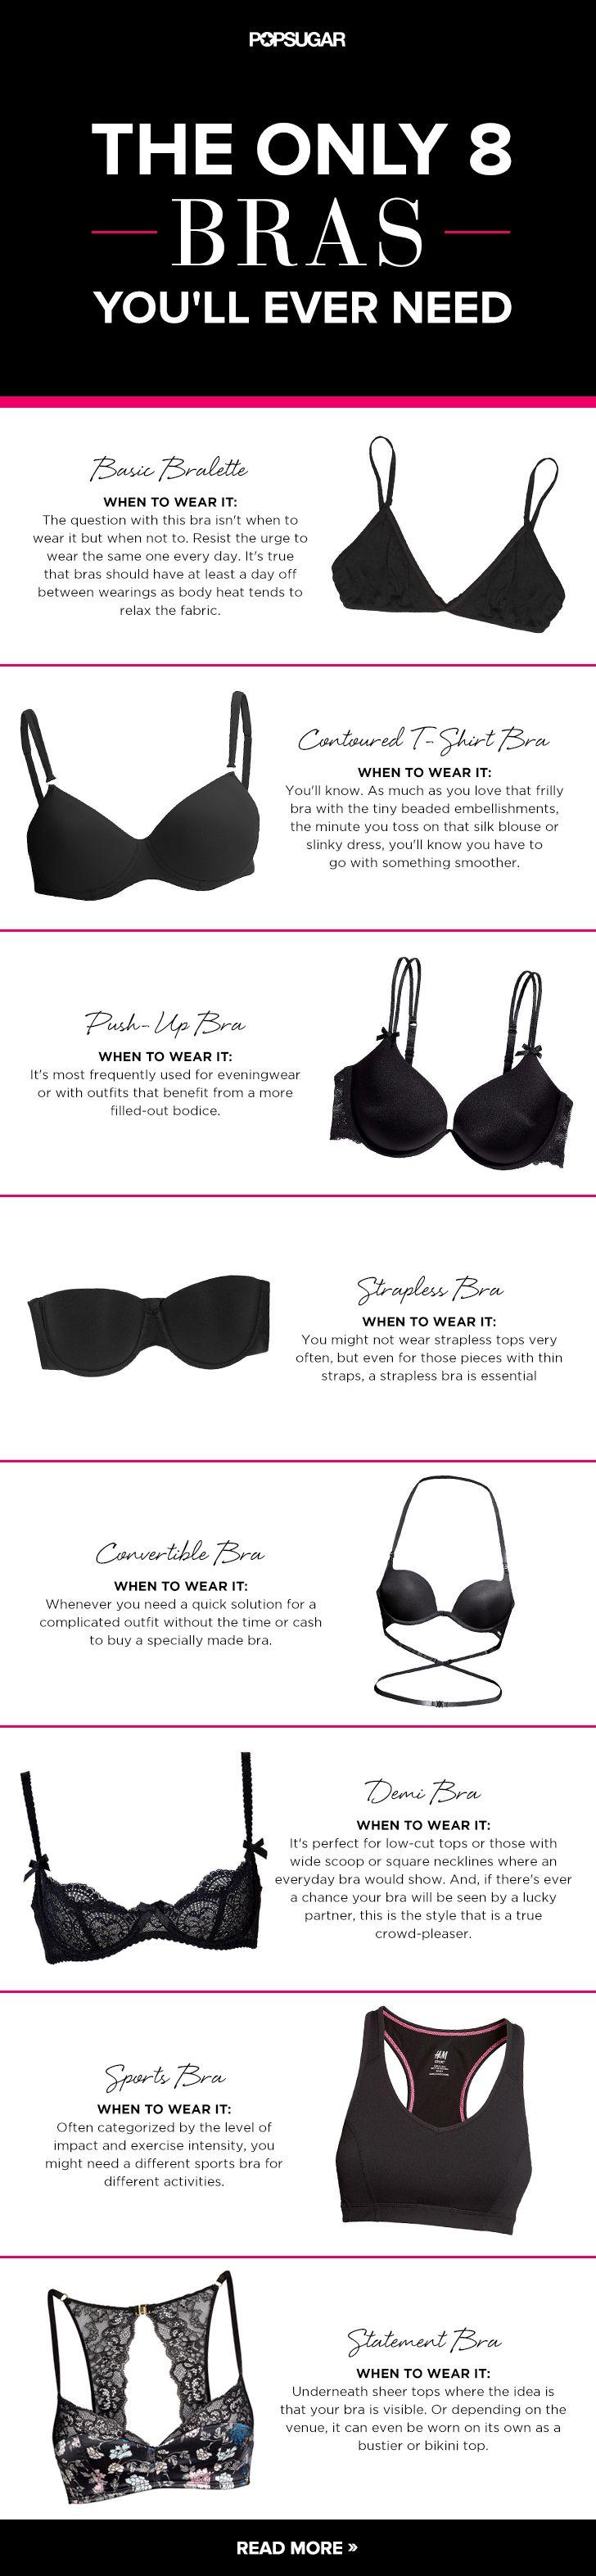 Hochzeit - The Only 8 Bras You'll Ever Need